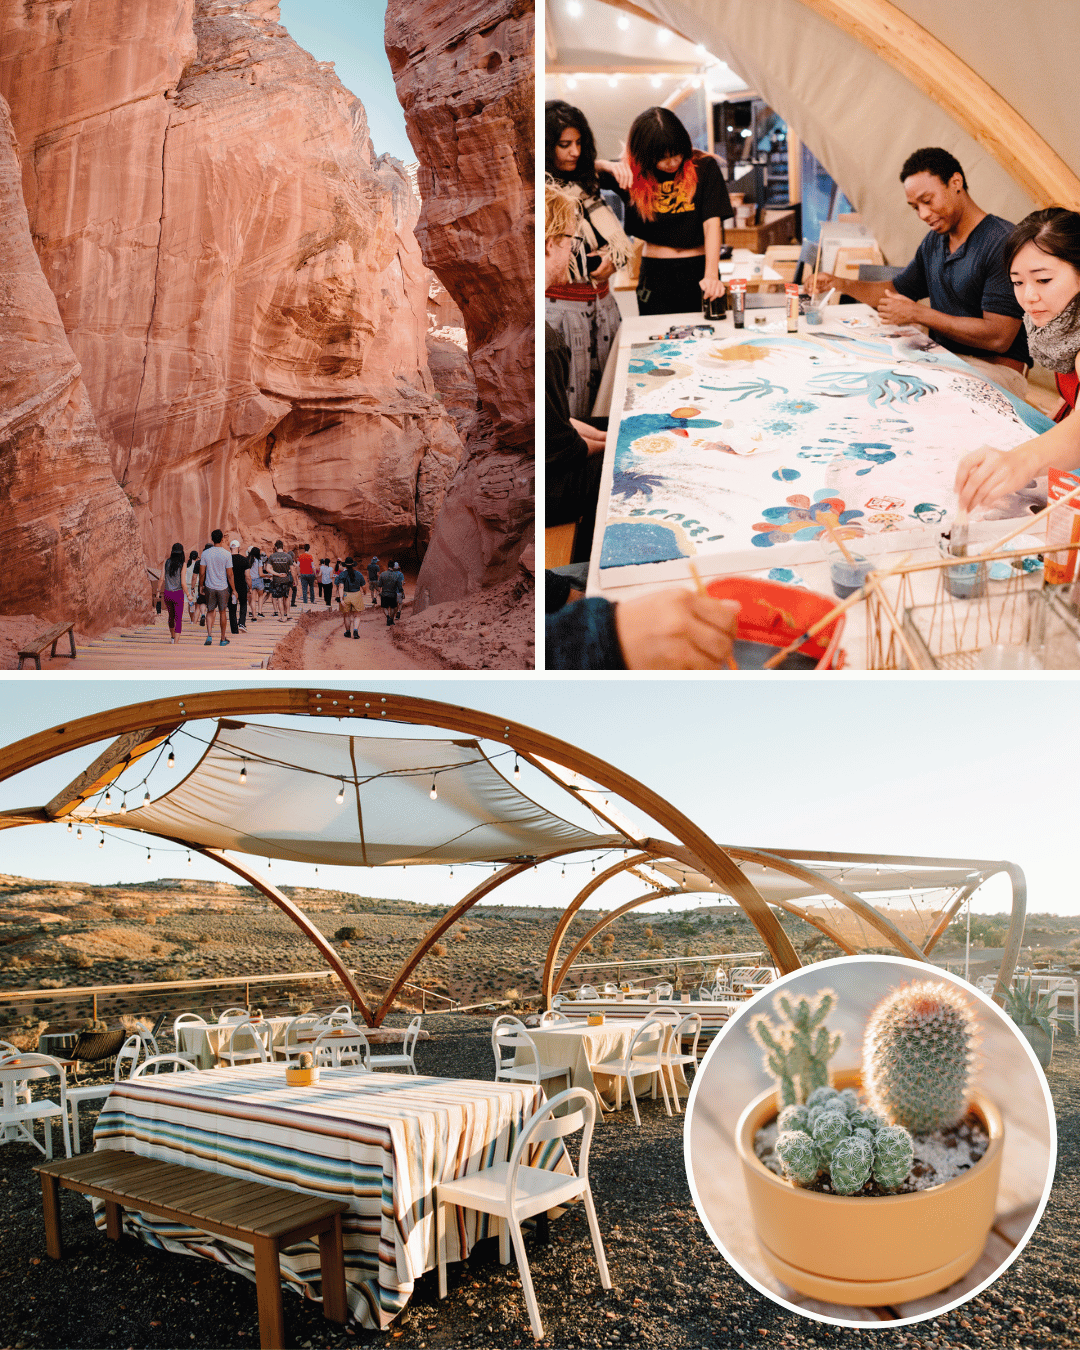 guests hiking through red rocks, guests painting, outdoor dinner space